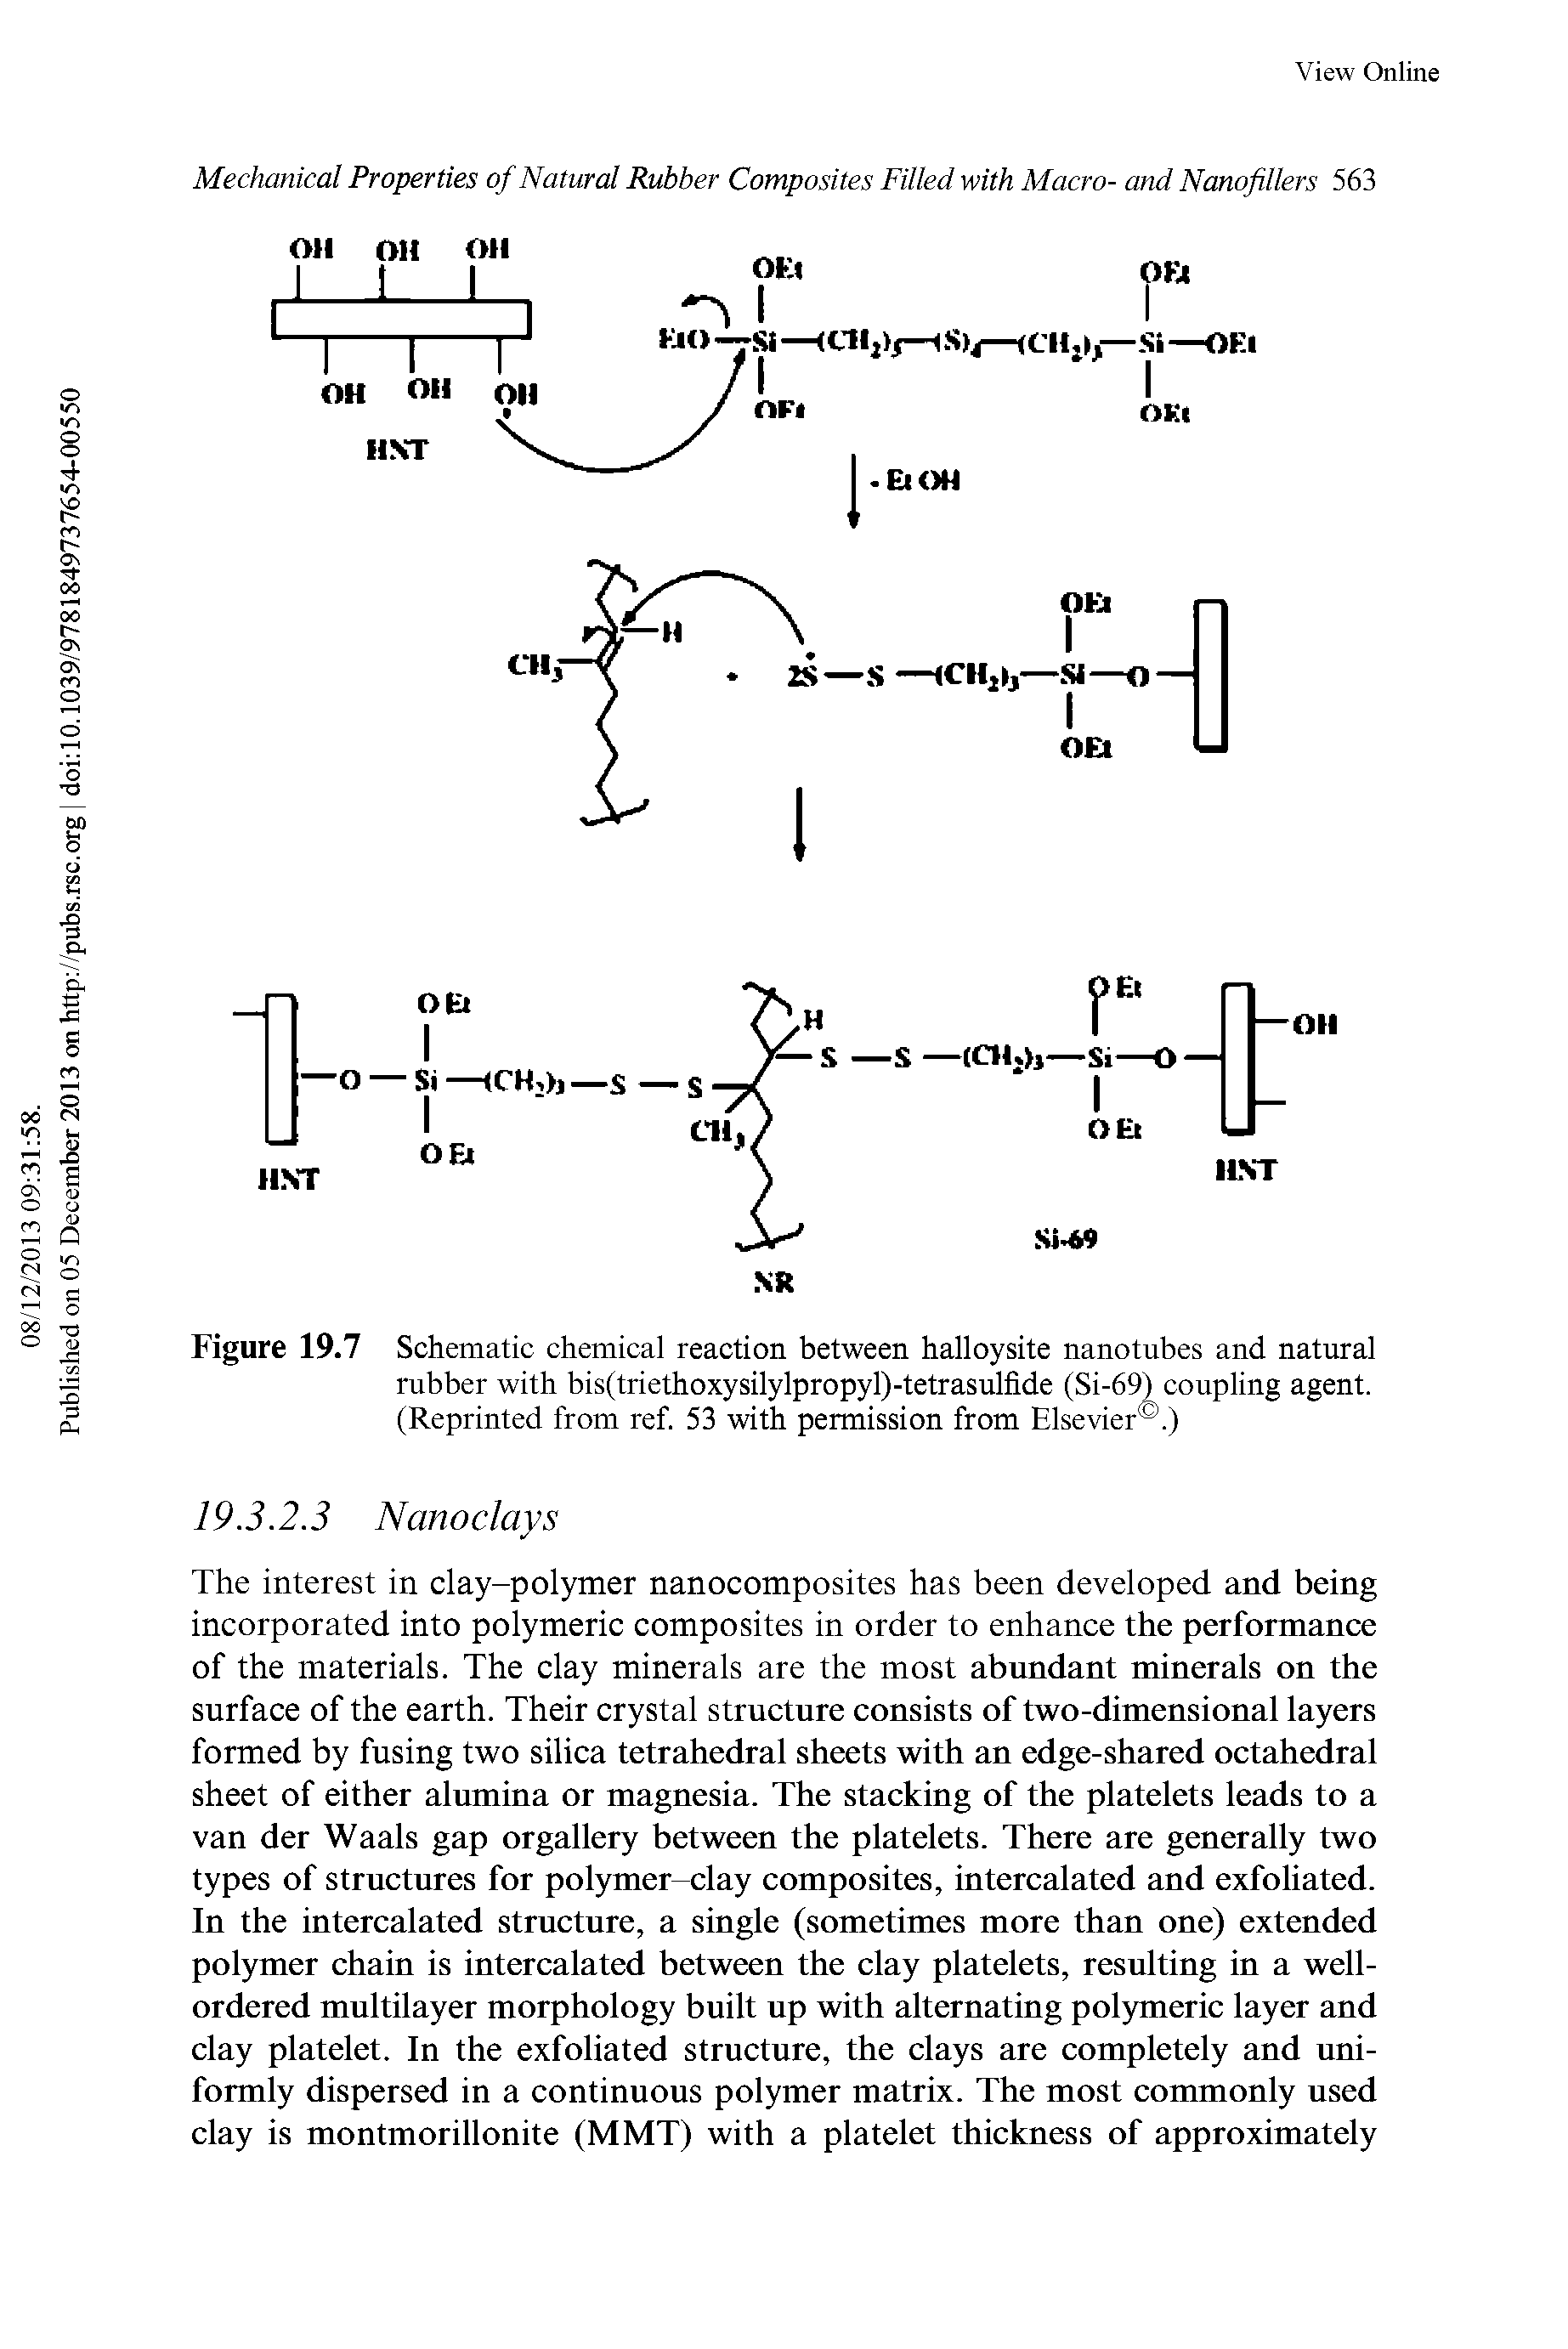 Figure 19.7 Schematic chemical reaction between halloysite nanotubes and natural rubber with bis(triethoxysilylpropyl)-tetrasulfide (Si-69) coupling agent. (Reprinted from ref. 53 with permission from Elsevier .)...